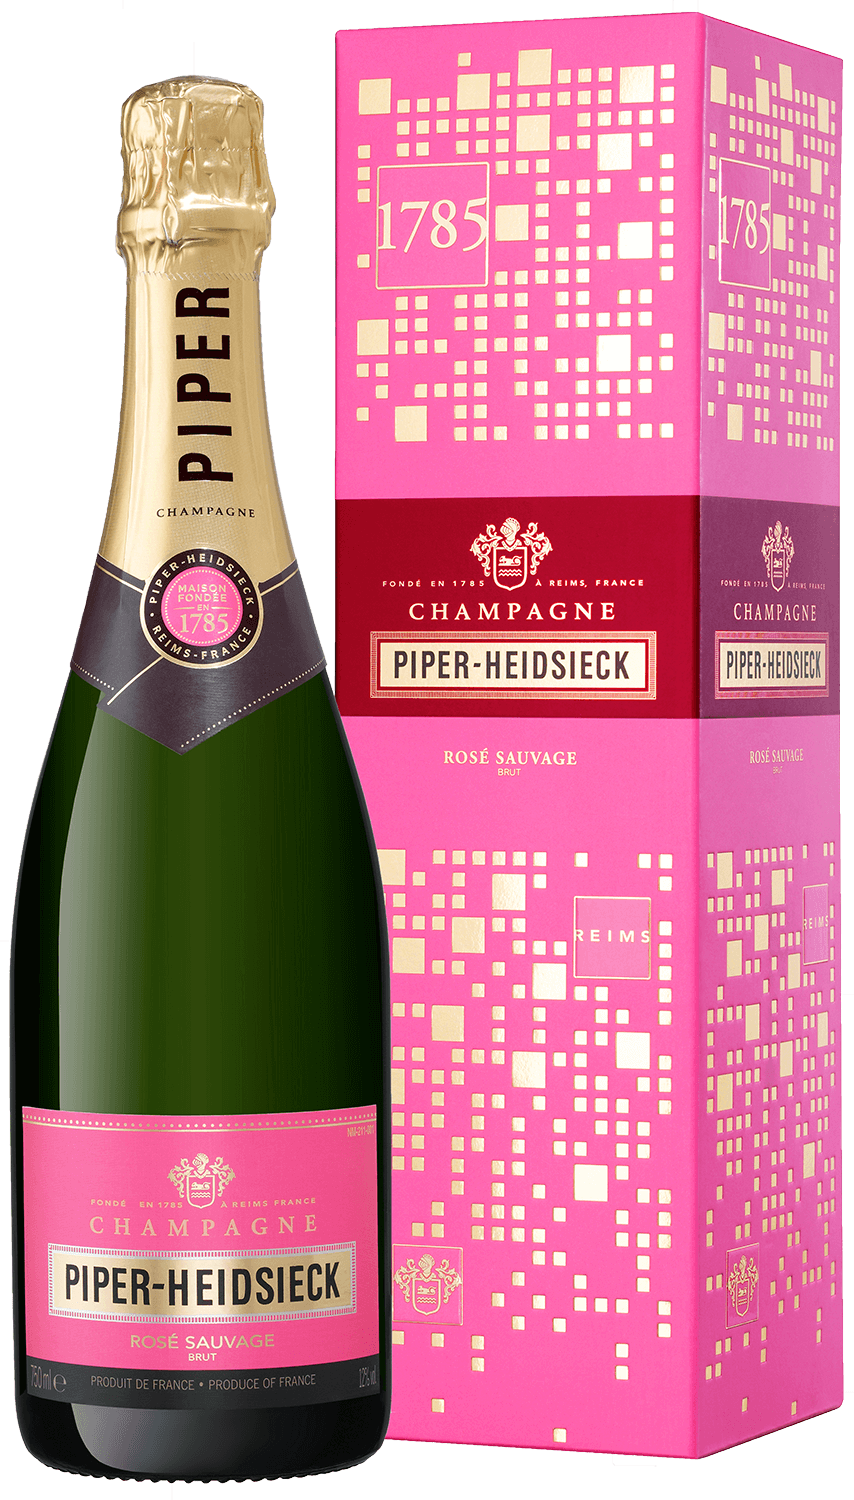 Piper-Heidsieck Sauvage Rose Brut Champagne AOC (gift box) piper heidsieck sauvage rose brut champagne aoc gift box bbq